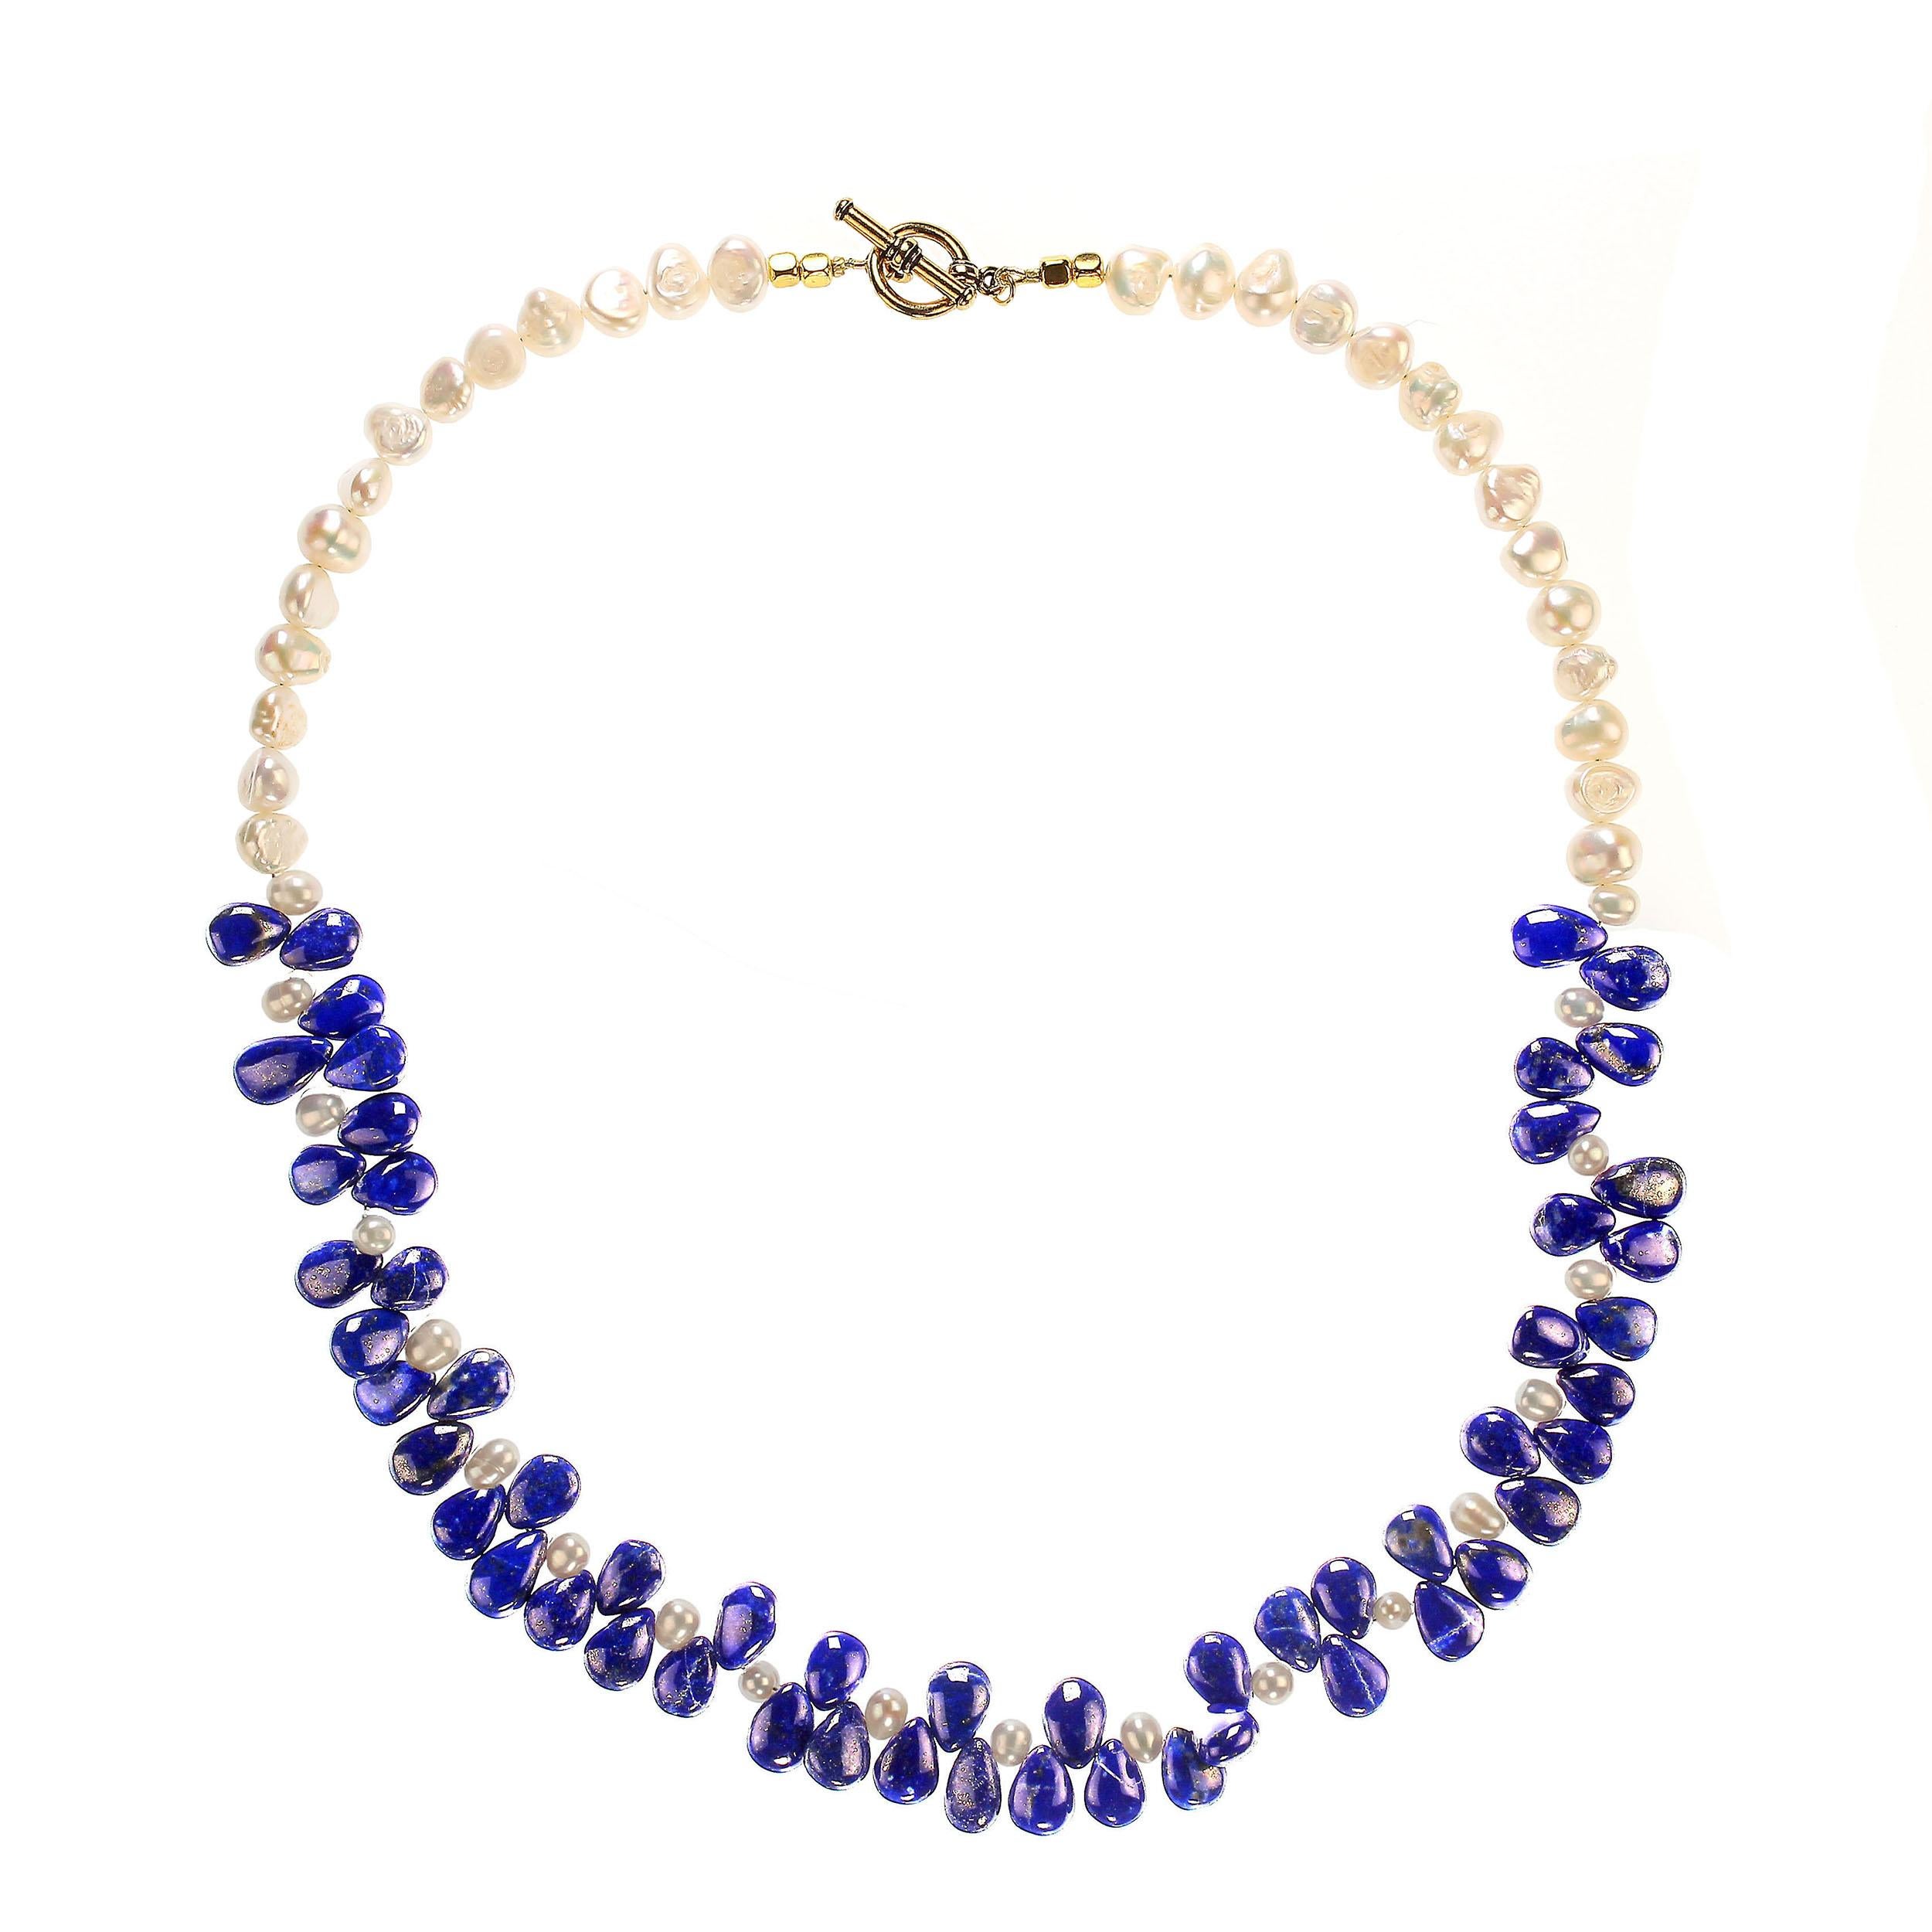 Women's or Men's AJD 20 Inch Fascinating, Unique Lapis Lazuli Briolette and White Pearl Necklace For Sale